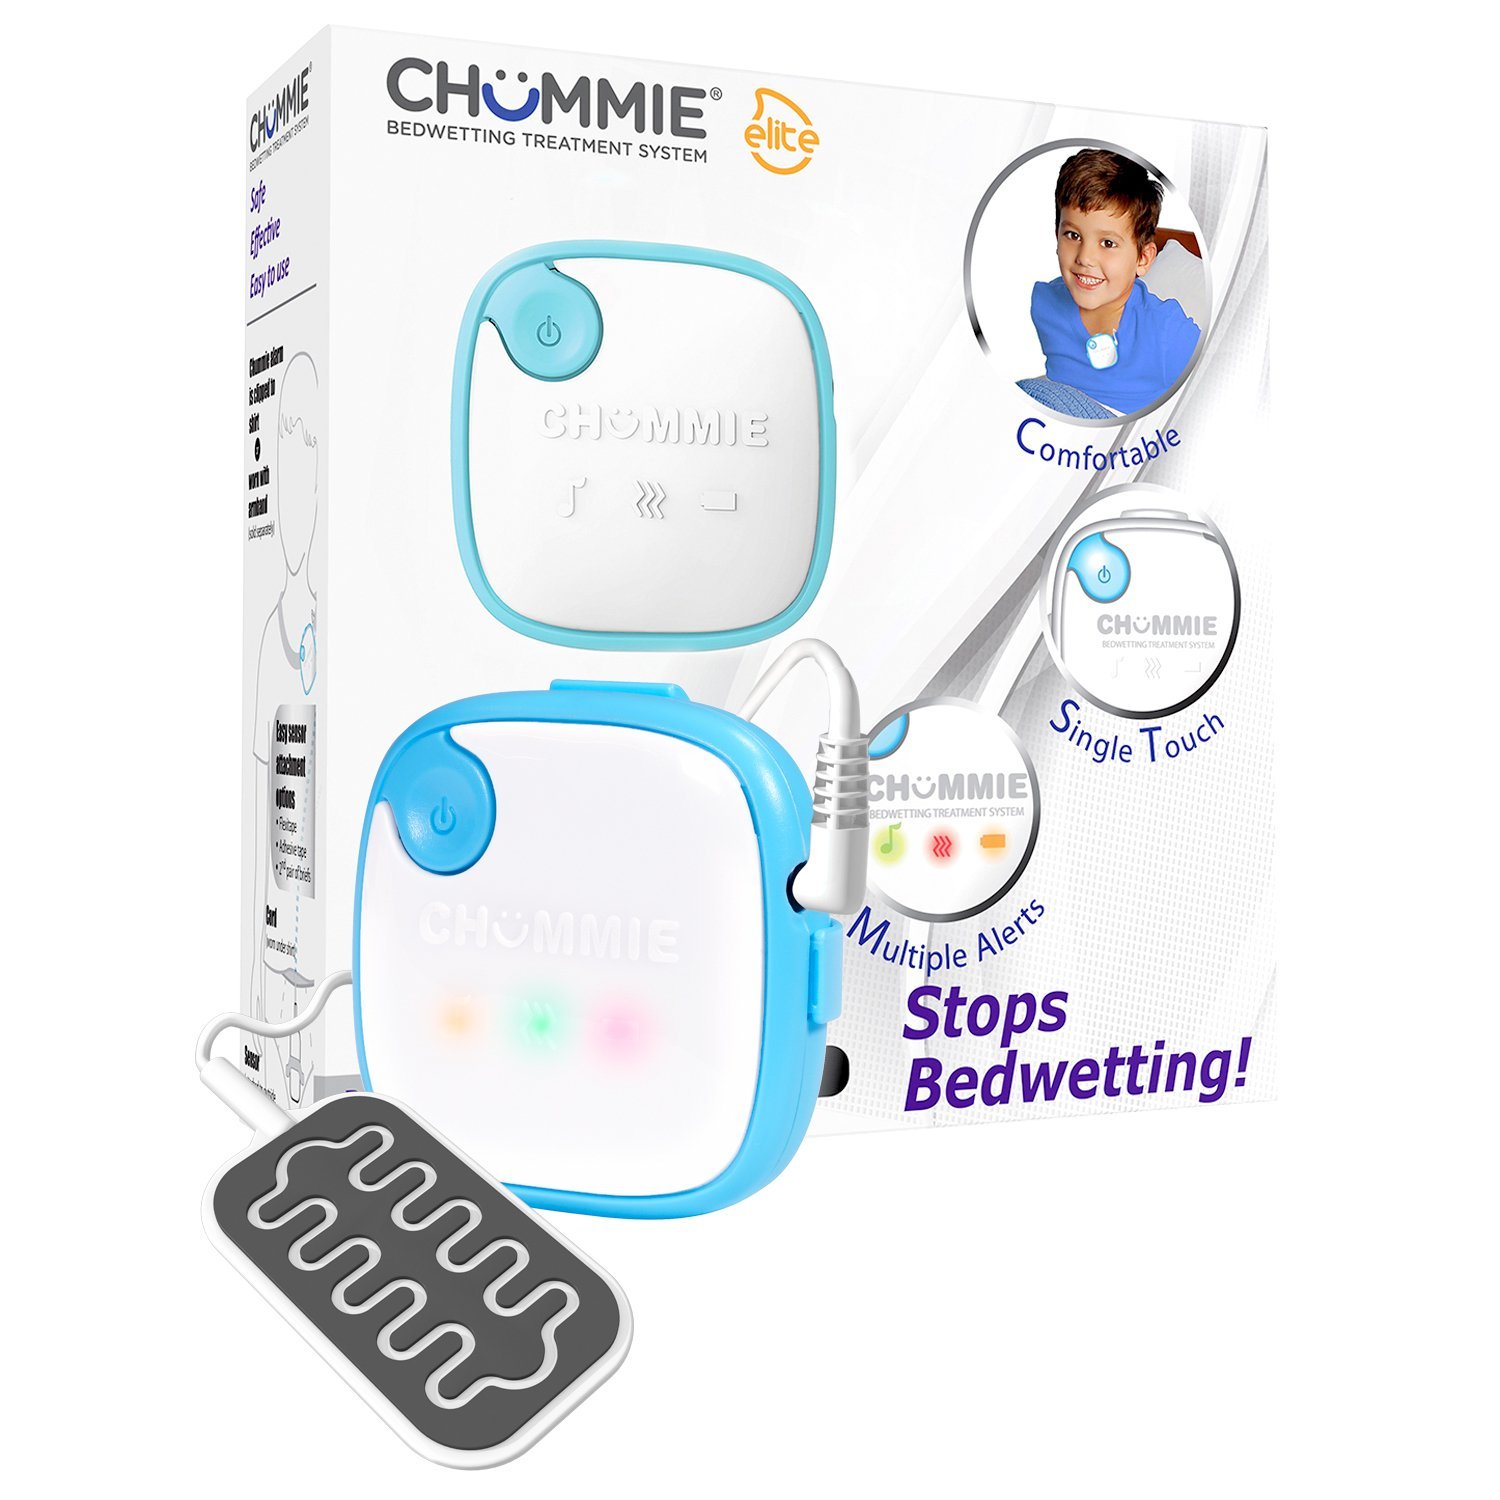 Chummie Elite Bedwetting Alarm For Children And Deep Sleepers  Award Winning Bedwetting Alarm System With Loud Sounds And Strong Vibrations Blue